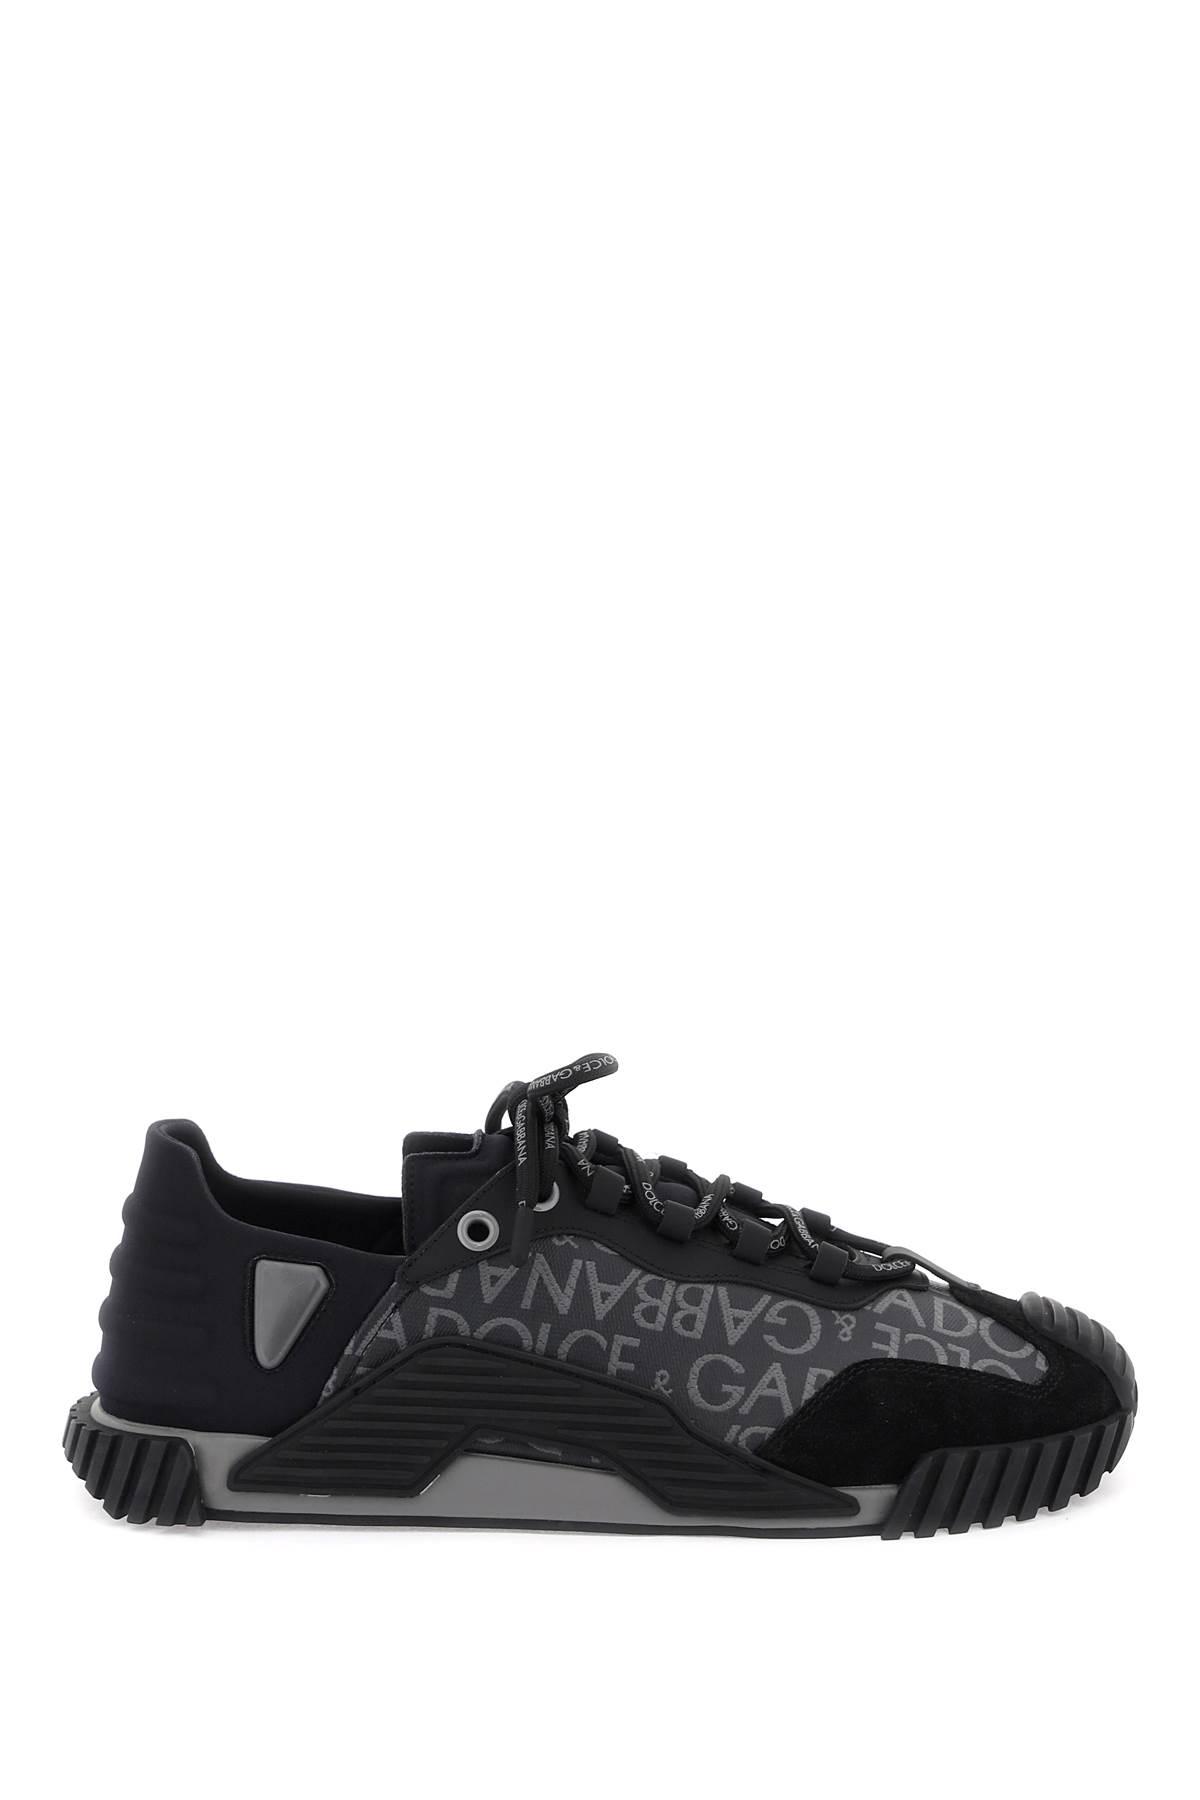 DOLCE & GABBANA NS1 coated jacquard sneakers